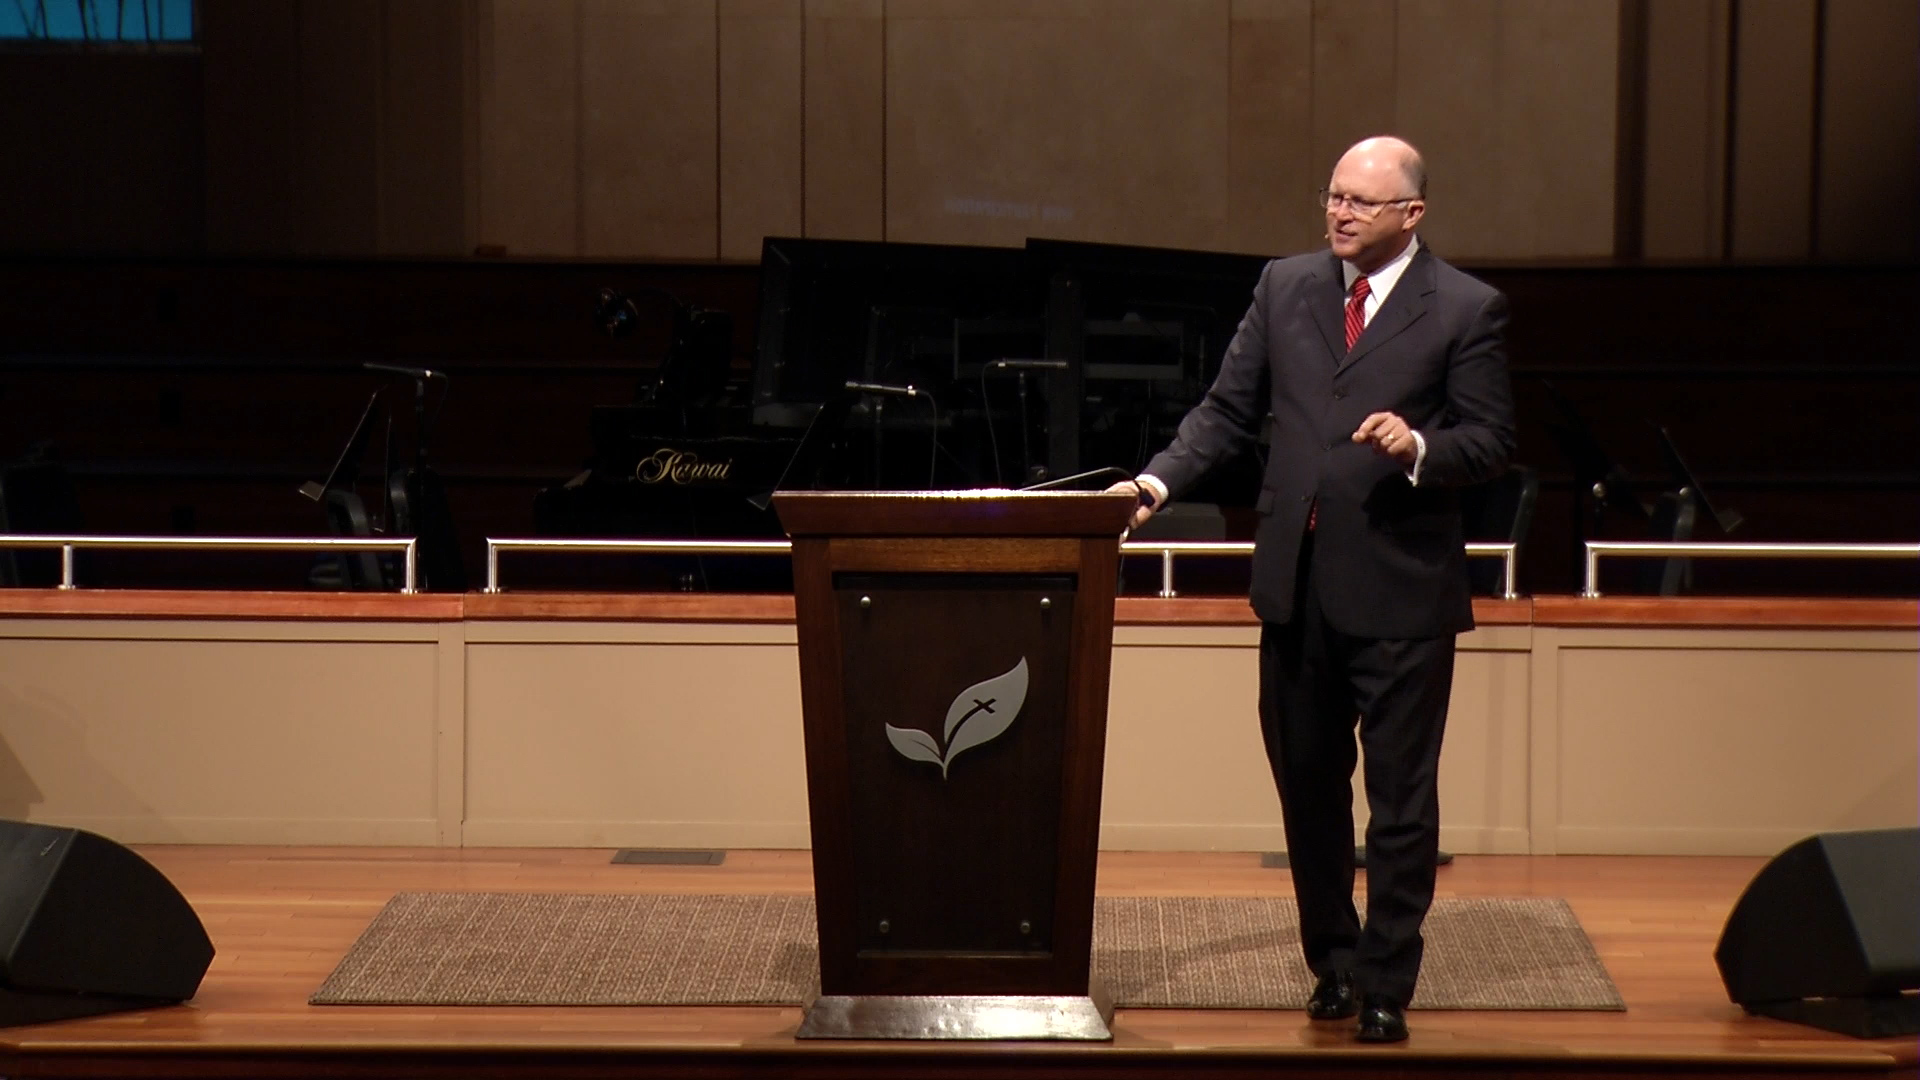 Pastor Paul Chappell: Compassion Changes Everything